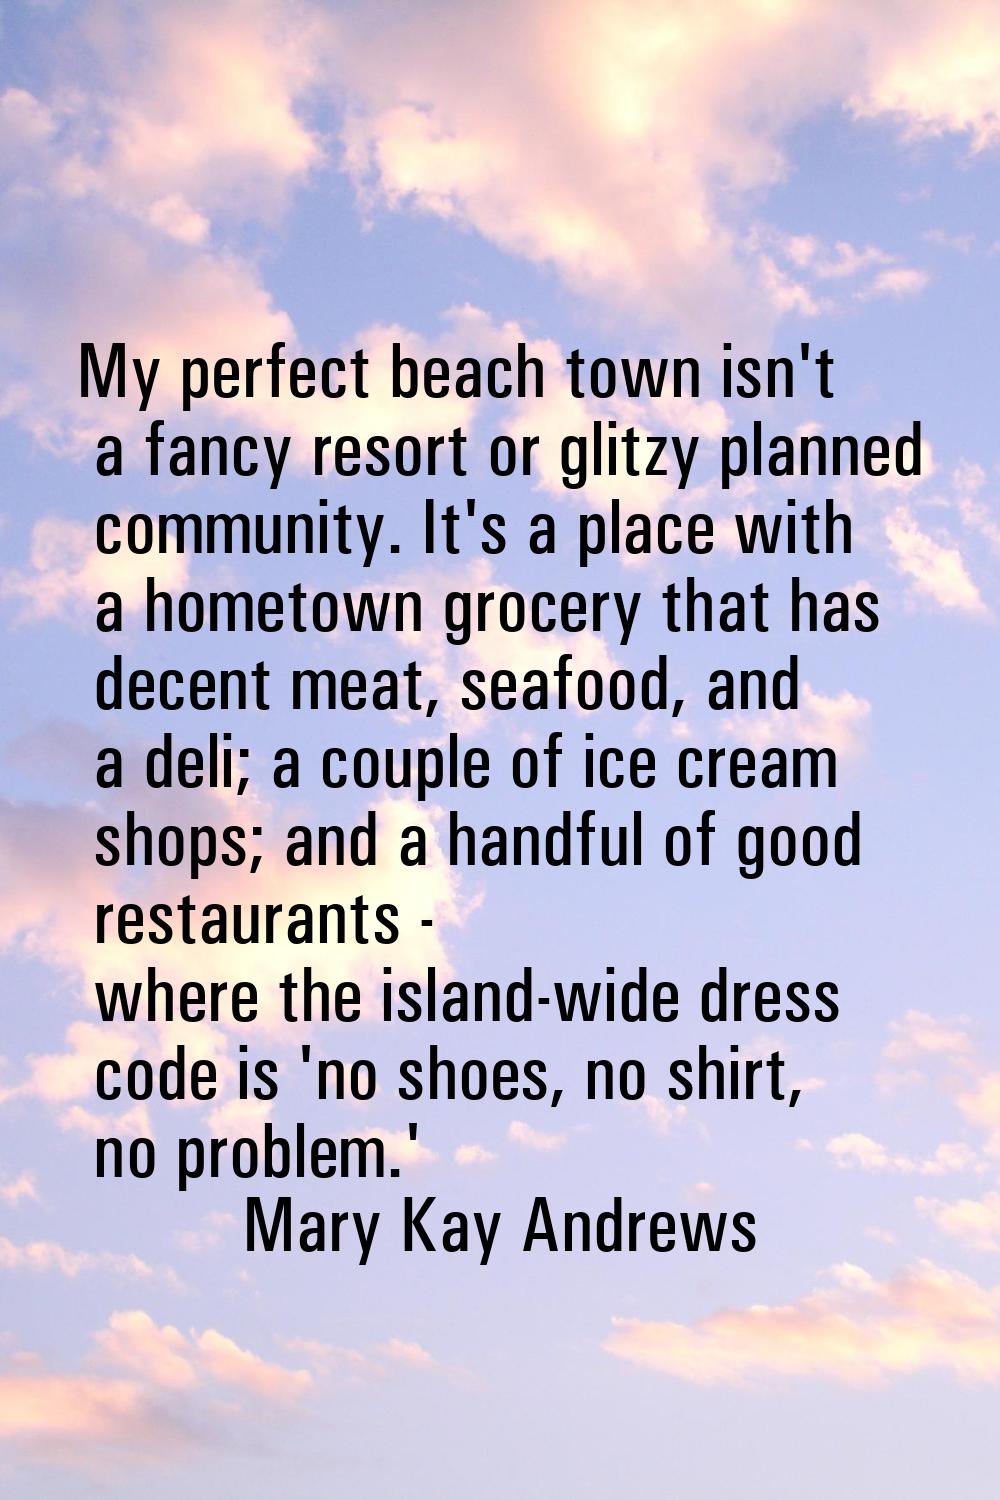 My perfect beach town isn't a fancy resort or glitzy planned community. It's a place with a hometow